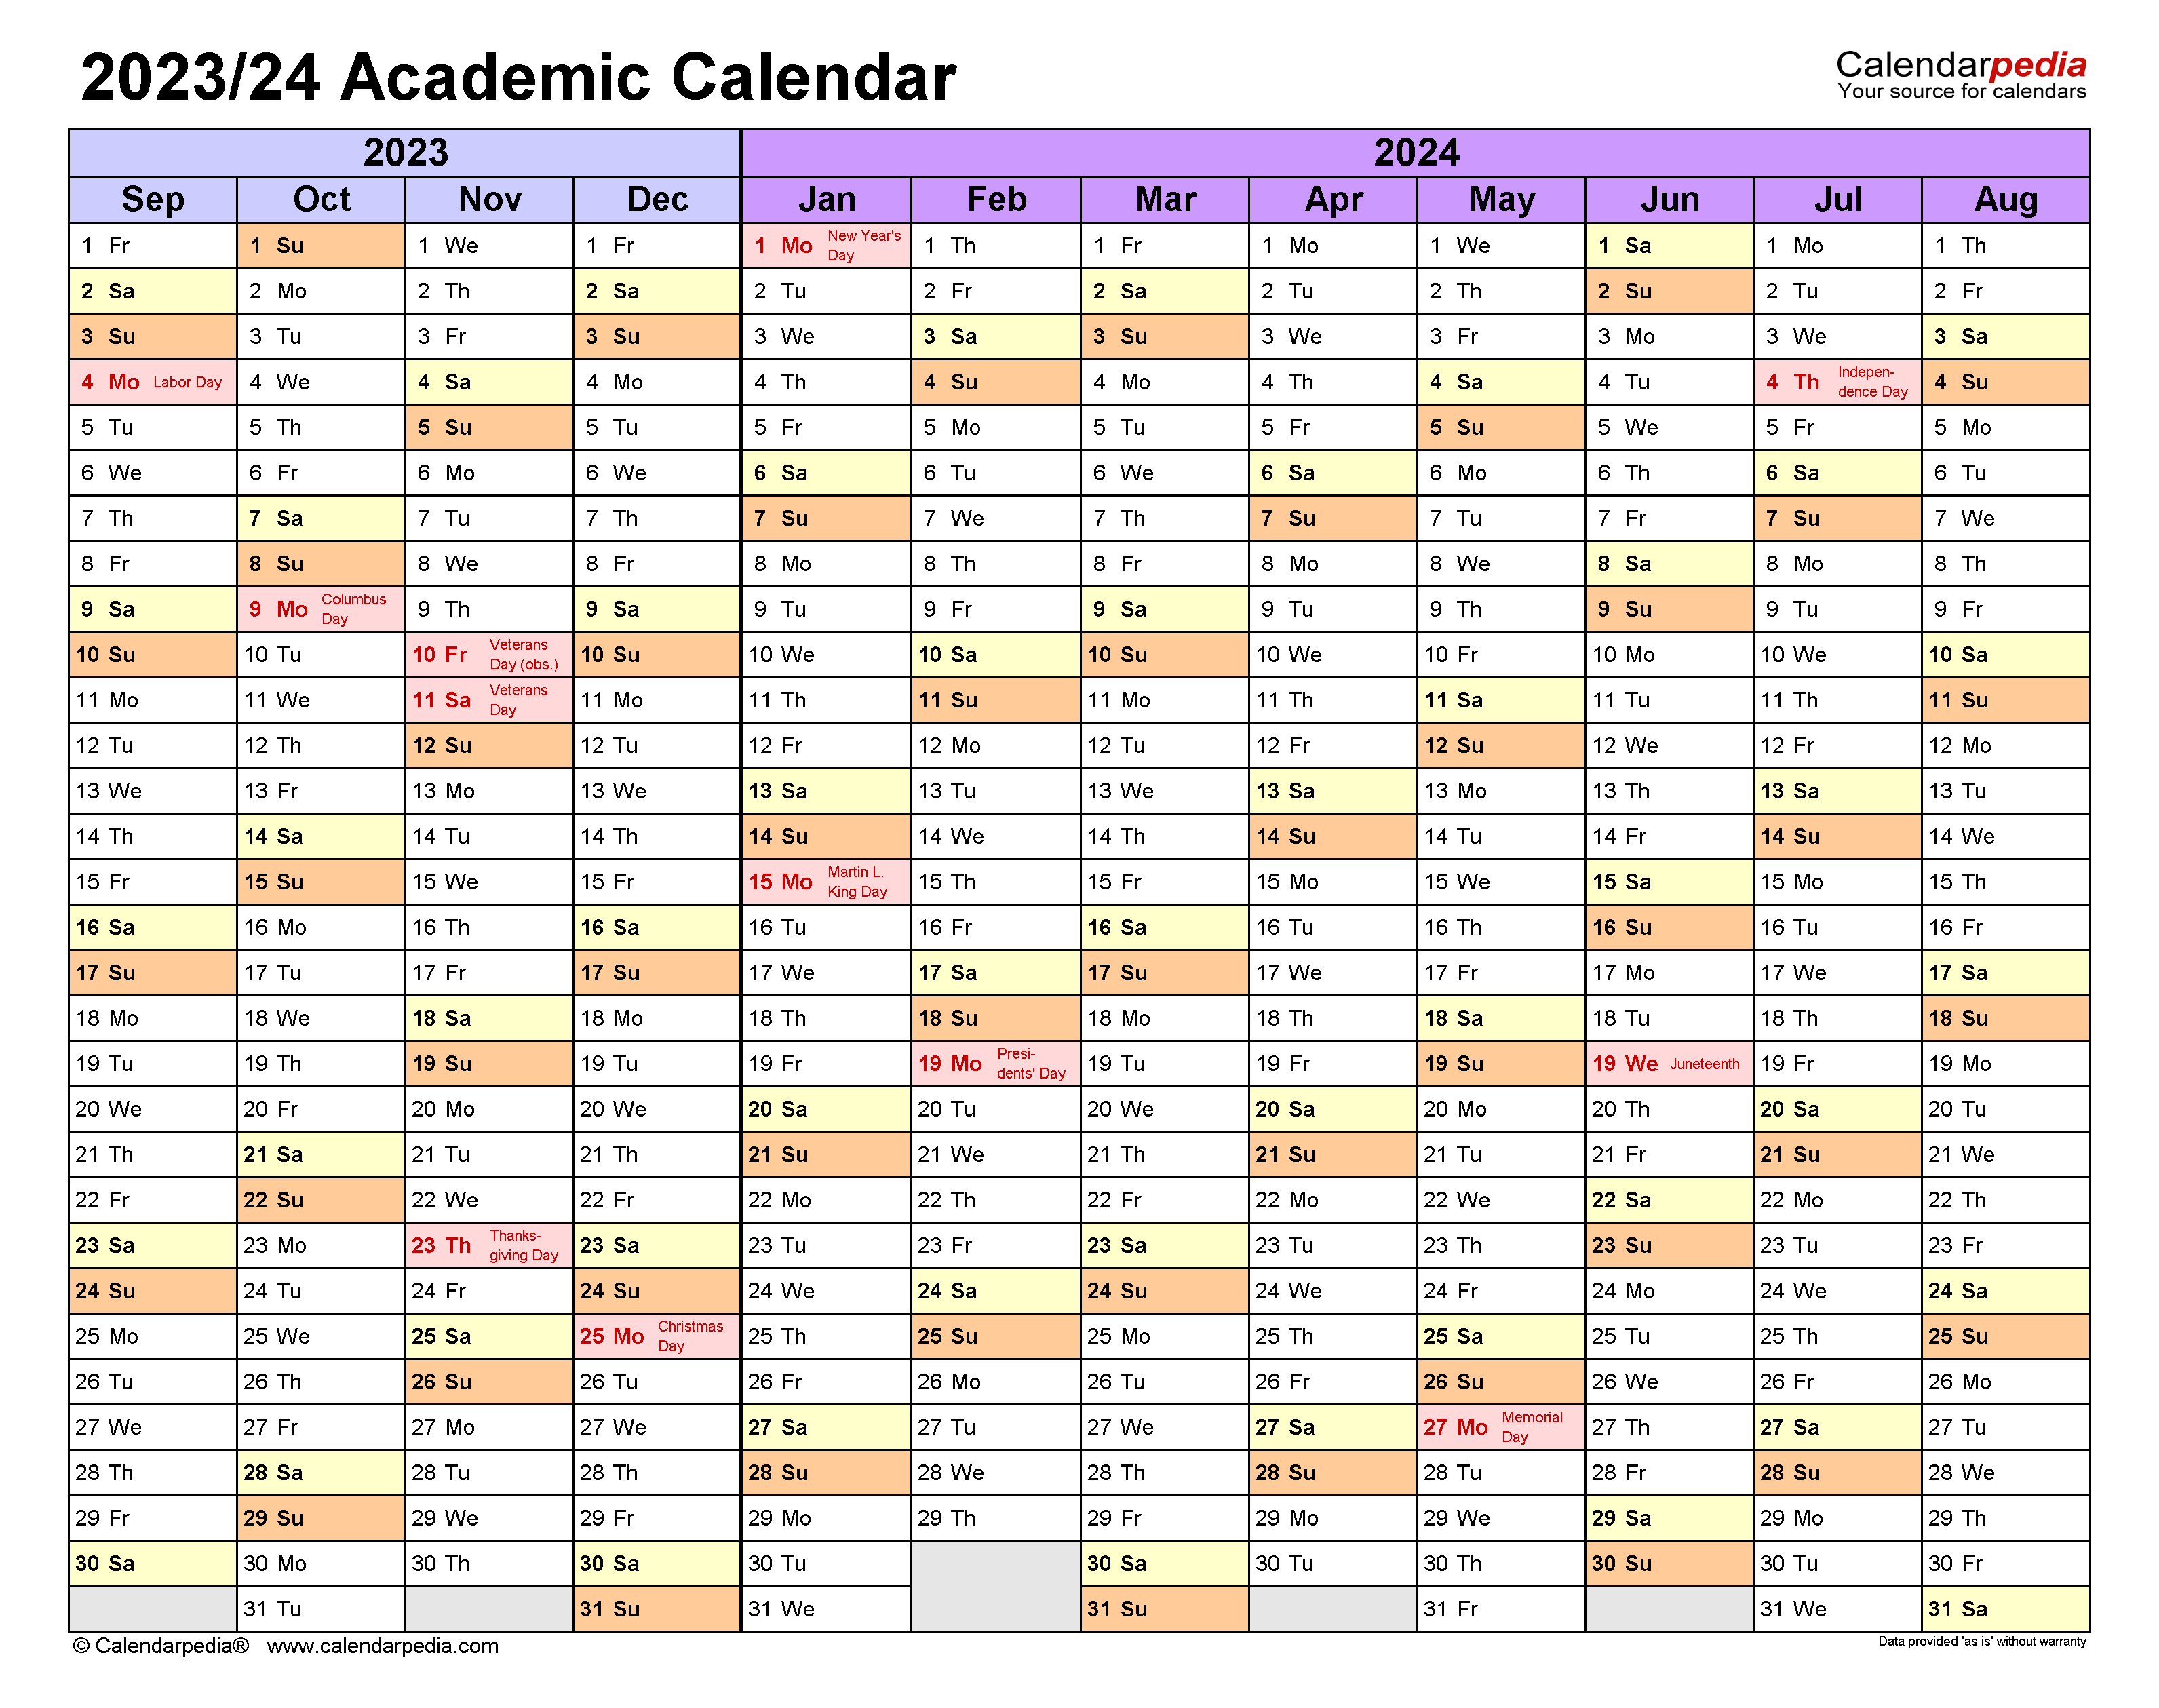 Academic Calendars 2023/2024 - Free Printable Pdf Templates for Academic Calendar August 2023 To July 2024